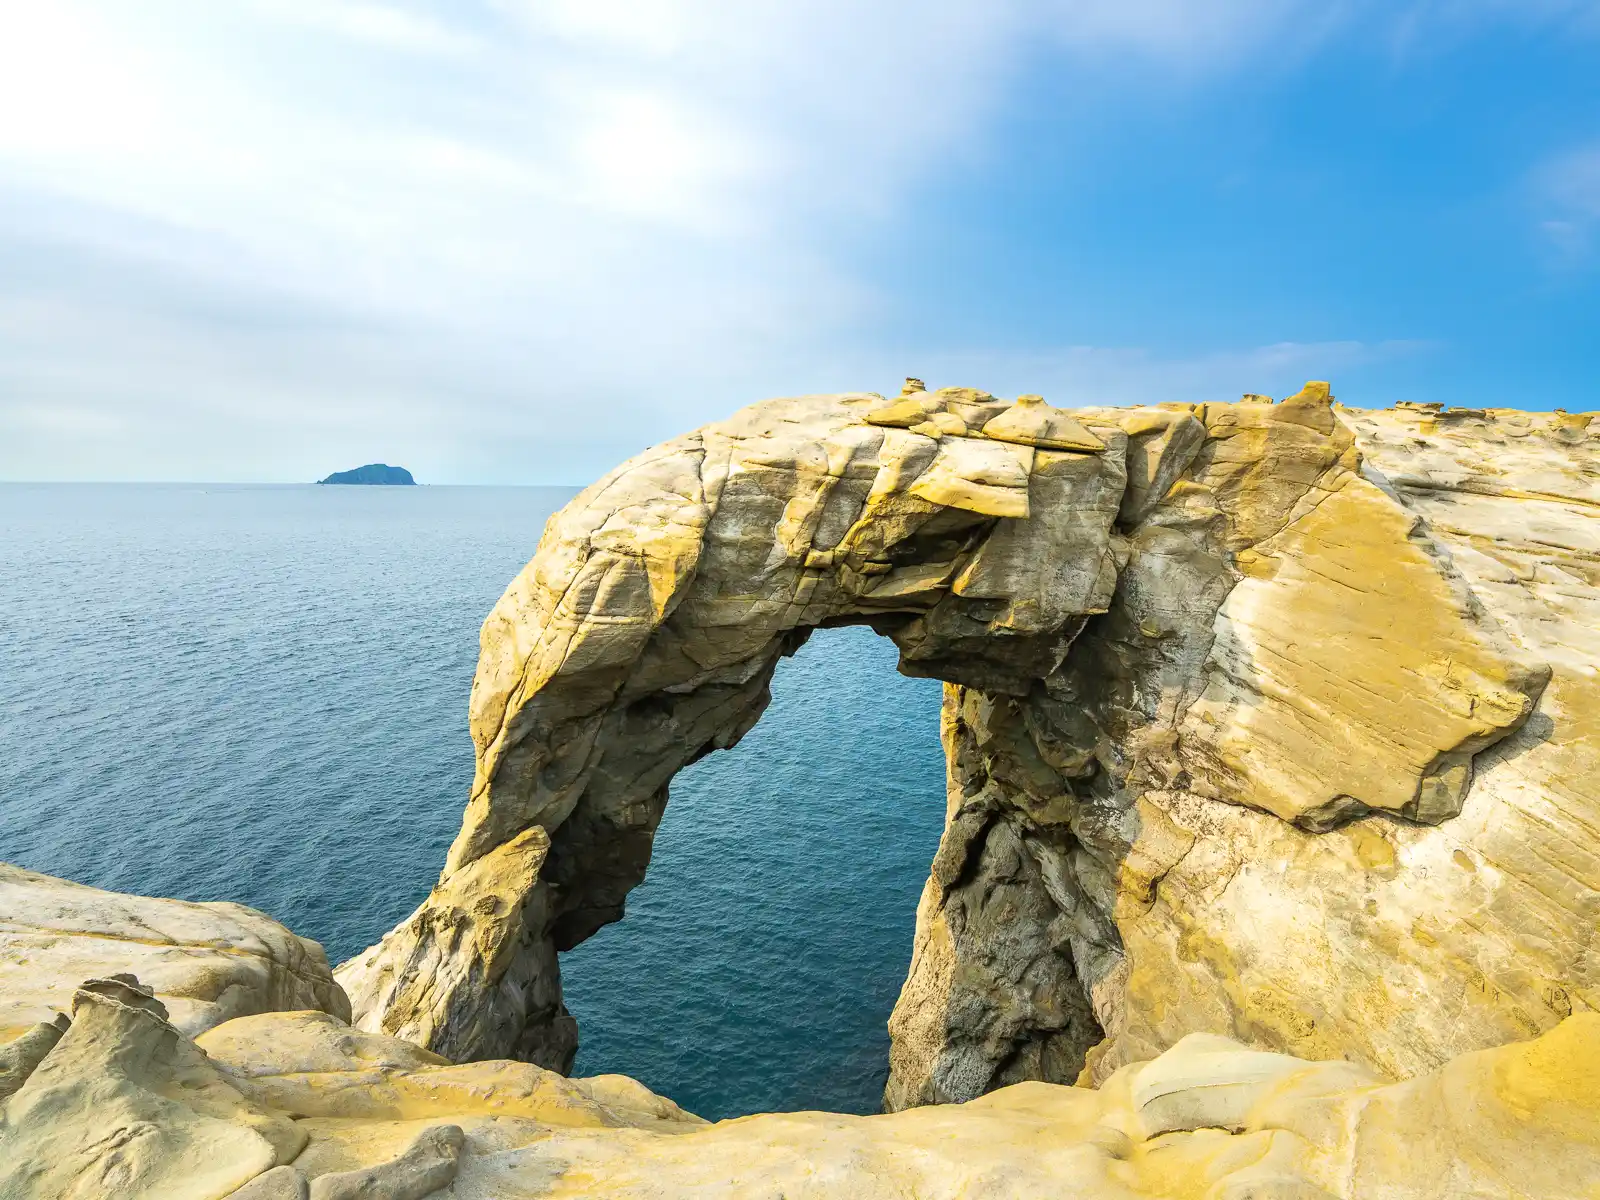 The trunk of Elephant Trunk Rock can be seen forming an arch and extending into the ocean below.